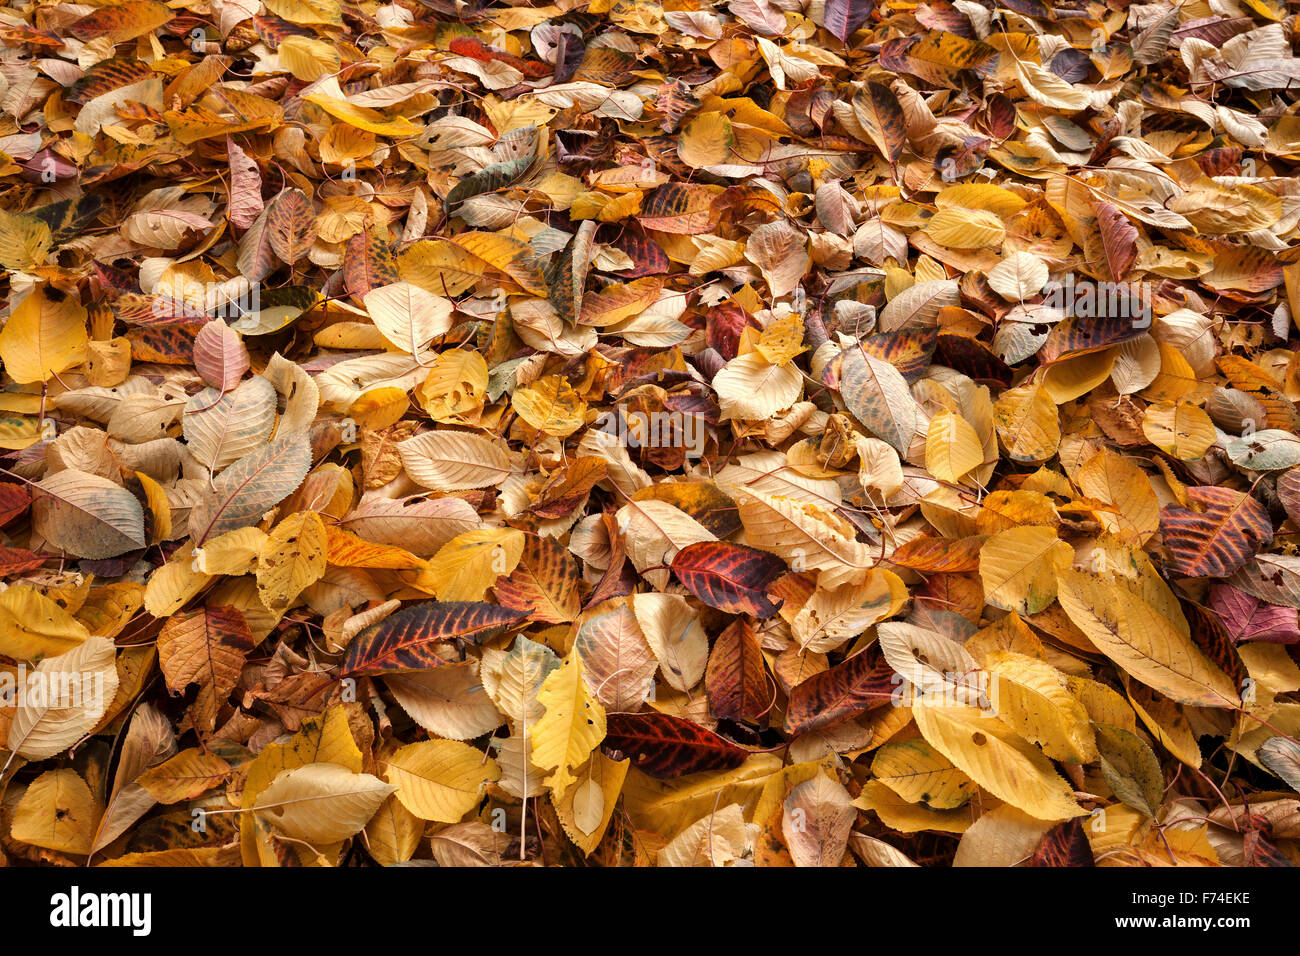 Autumn leaves on ground, Germany Stock Photo